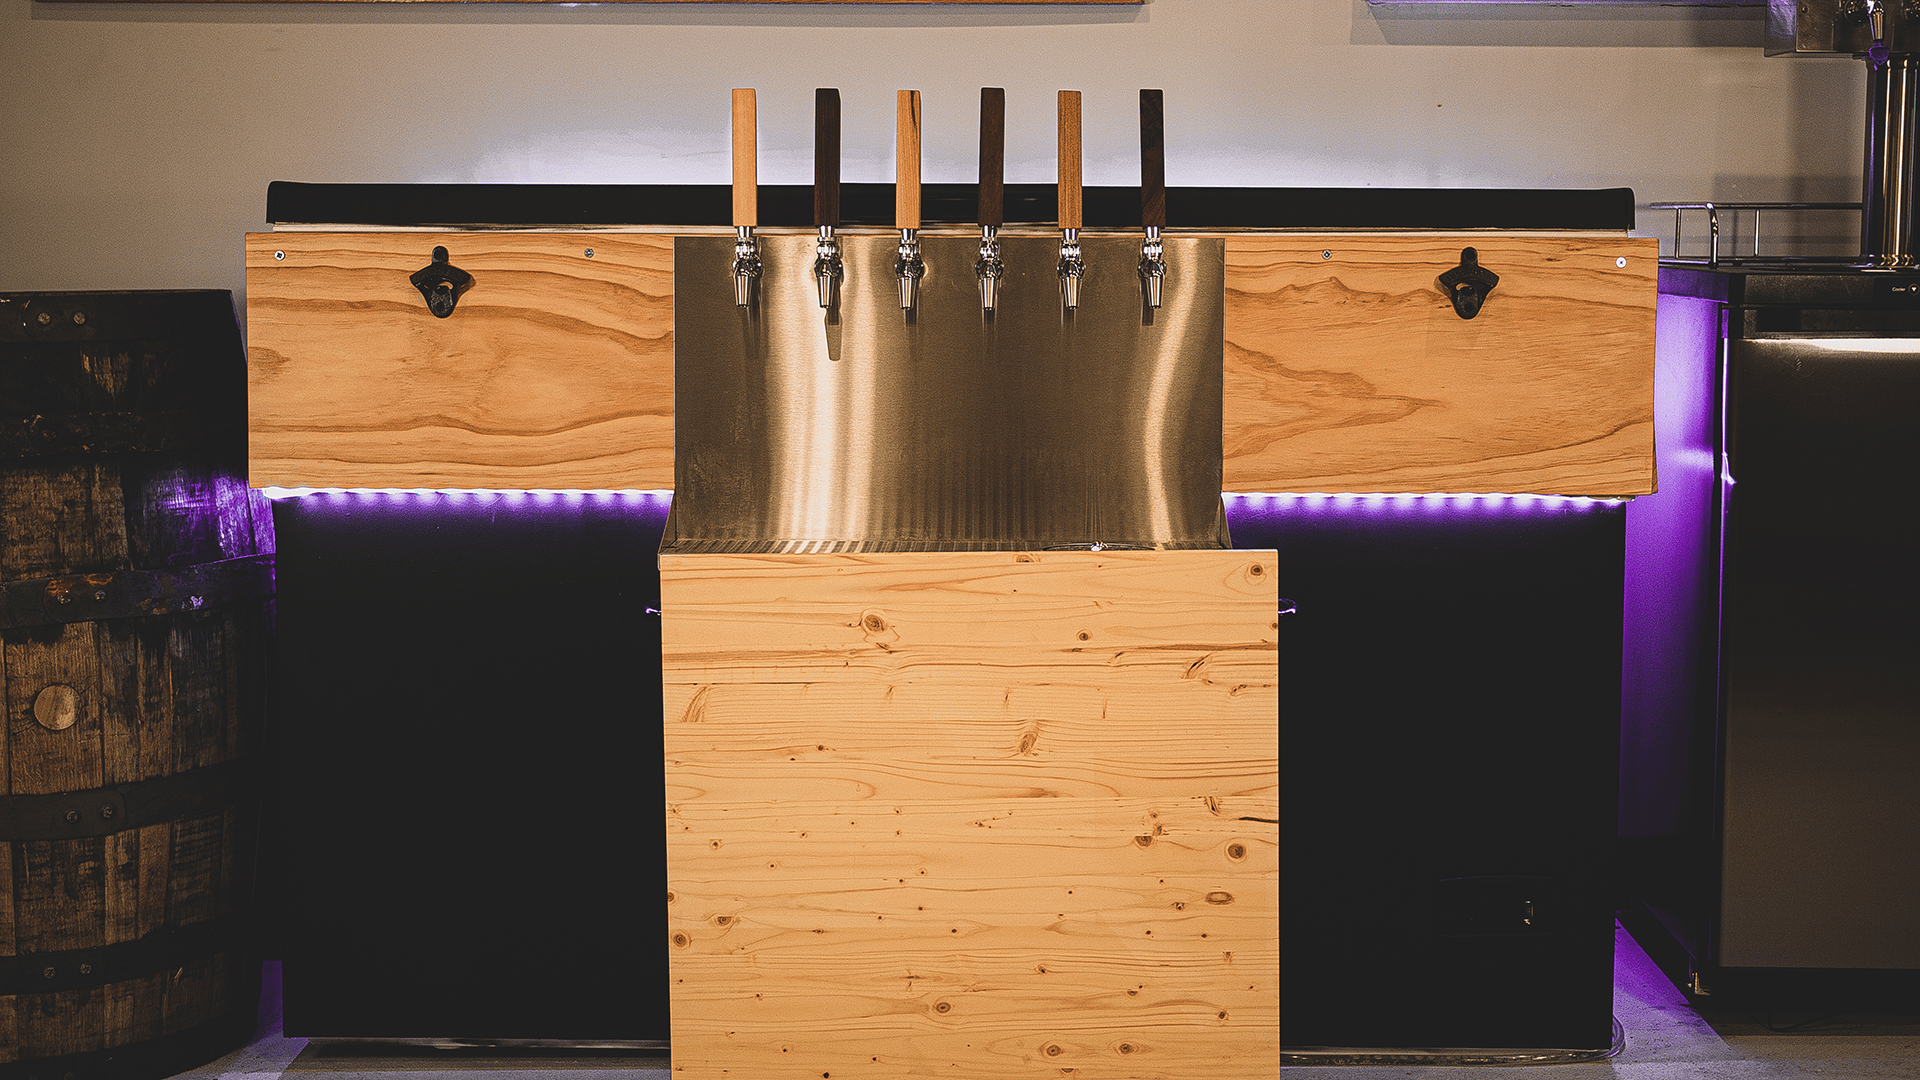 https://www.brewcabin.com/wp-content/uploads/How-to-Build-a-Keezer-for-Homebrewing.png